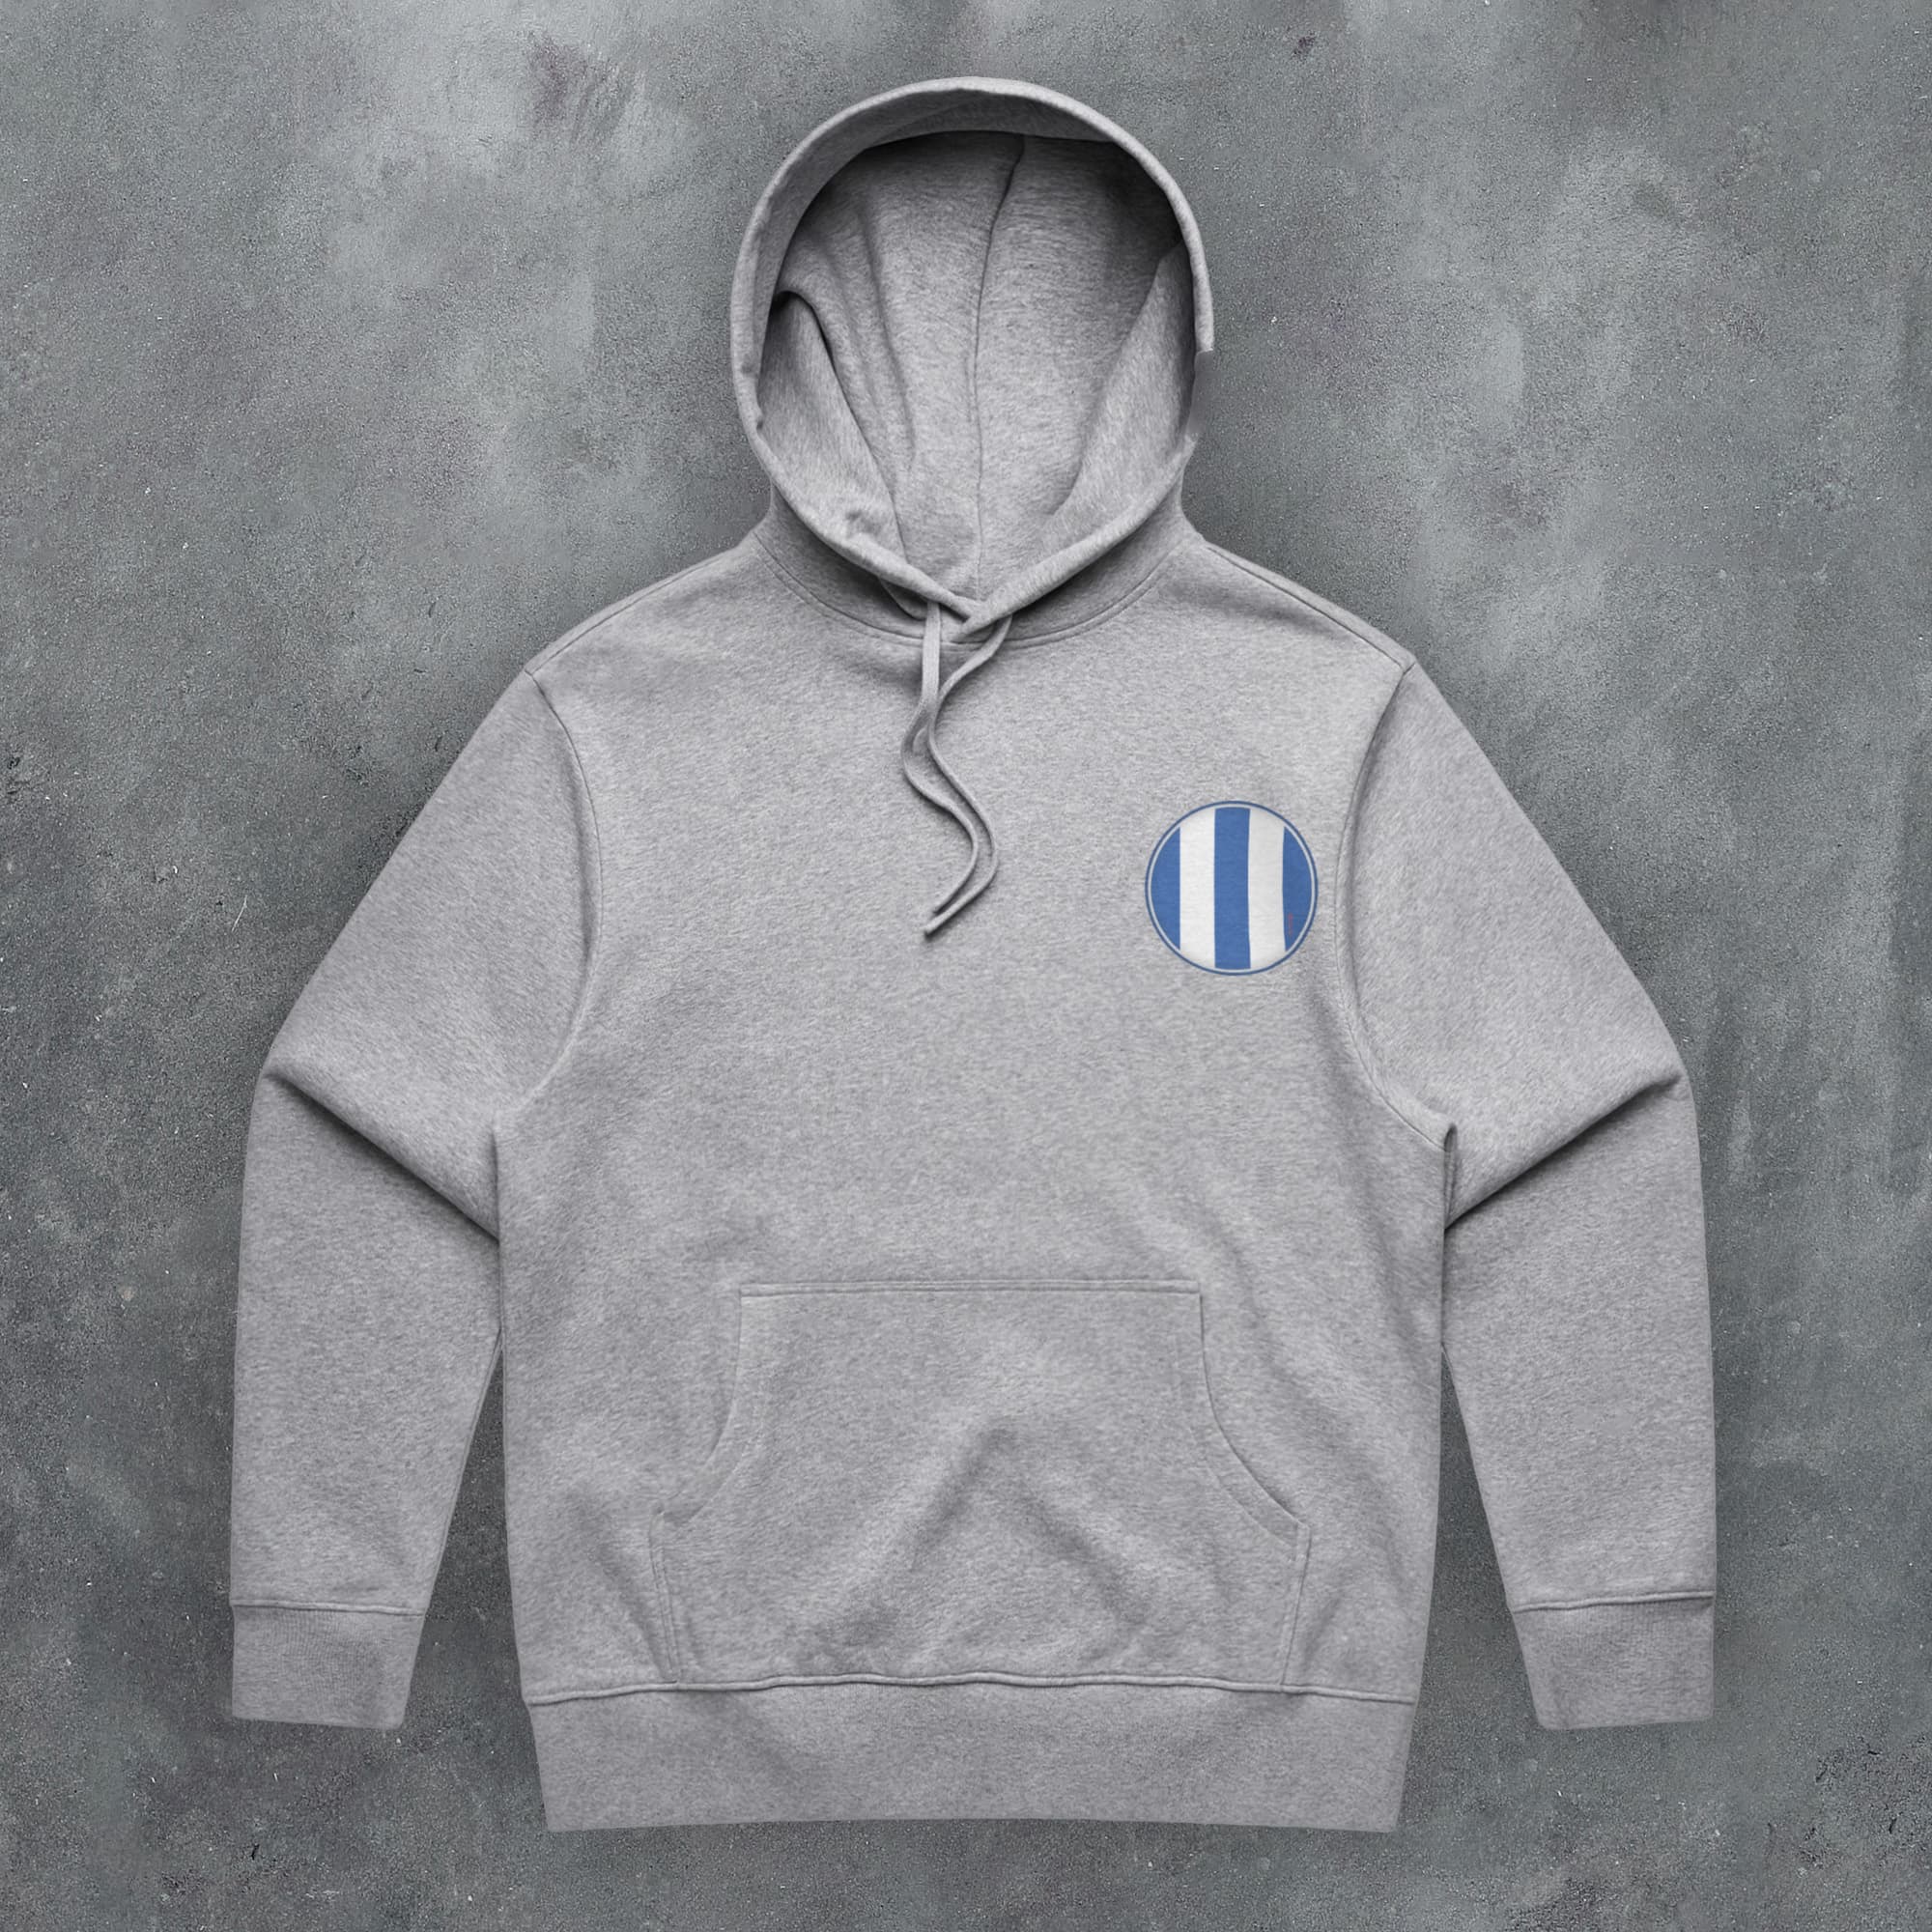 a grey hoodie with a blue and white stripe on it